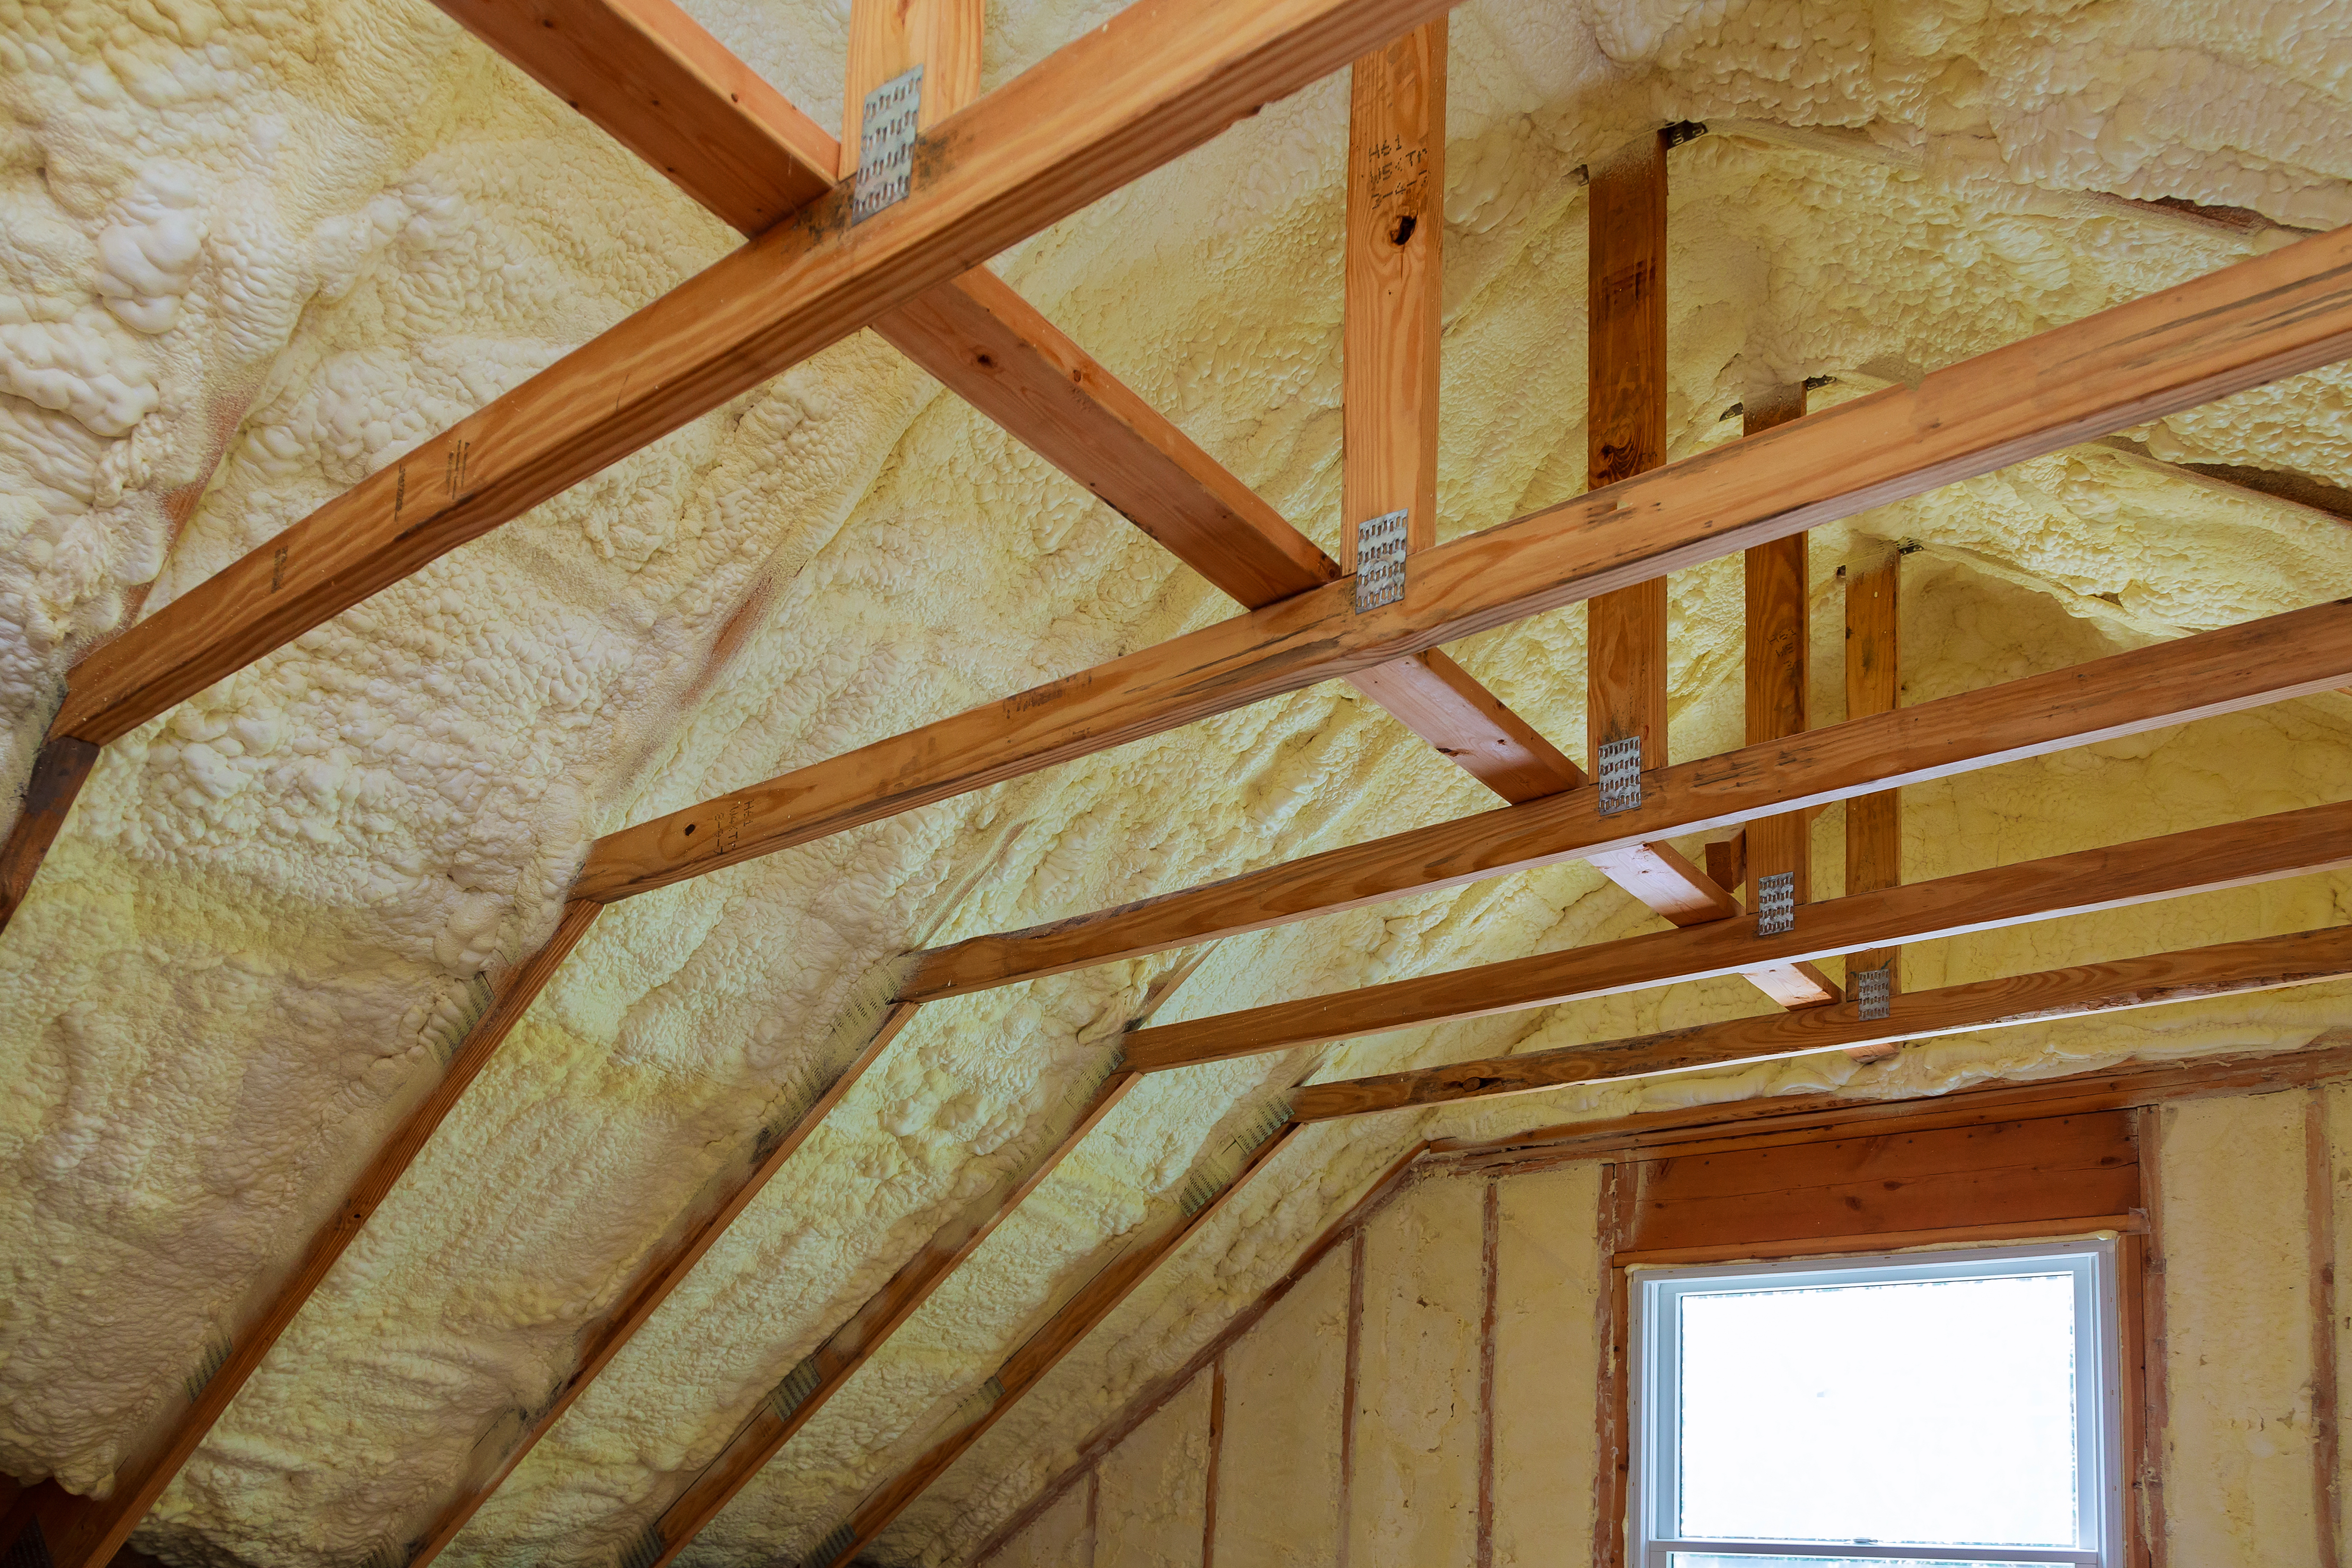 Understanding These Insulation Facts Will Help You Know When to Call the Pros